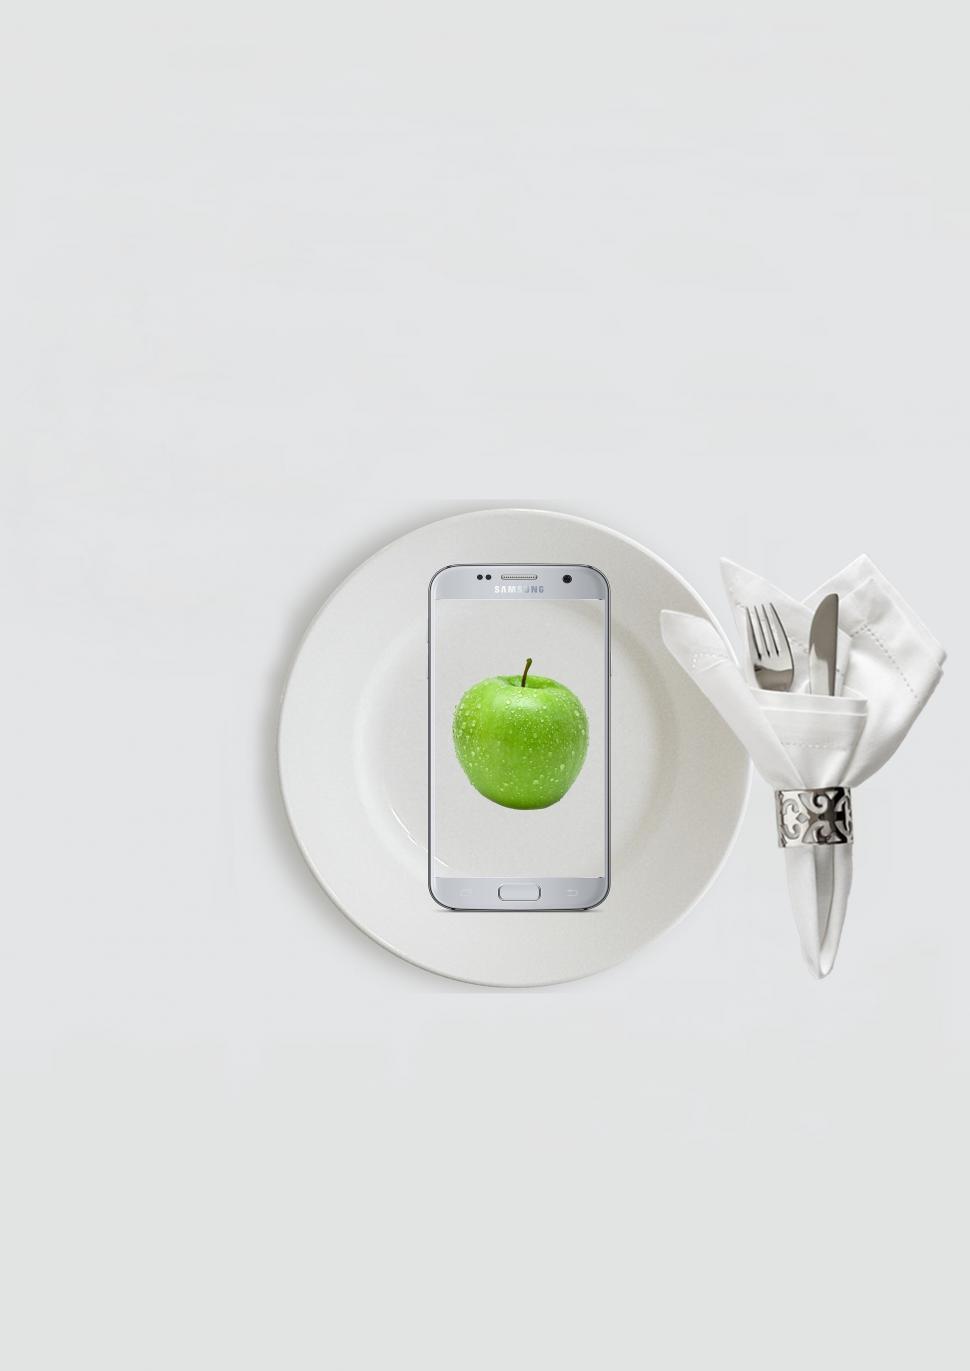 Free Image of Apple and Mobile Phone with fork and knife - Photomontage 